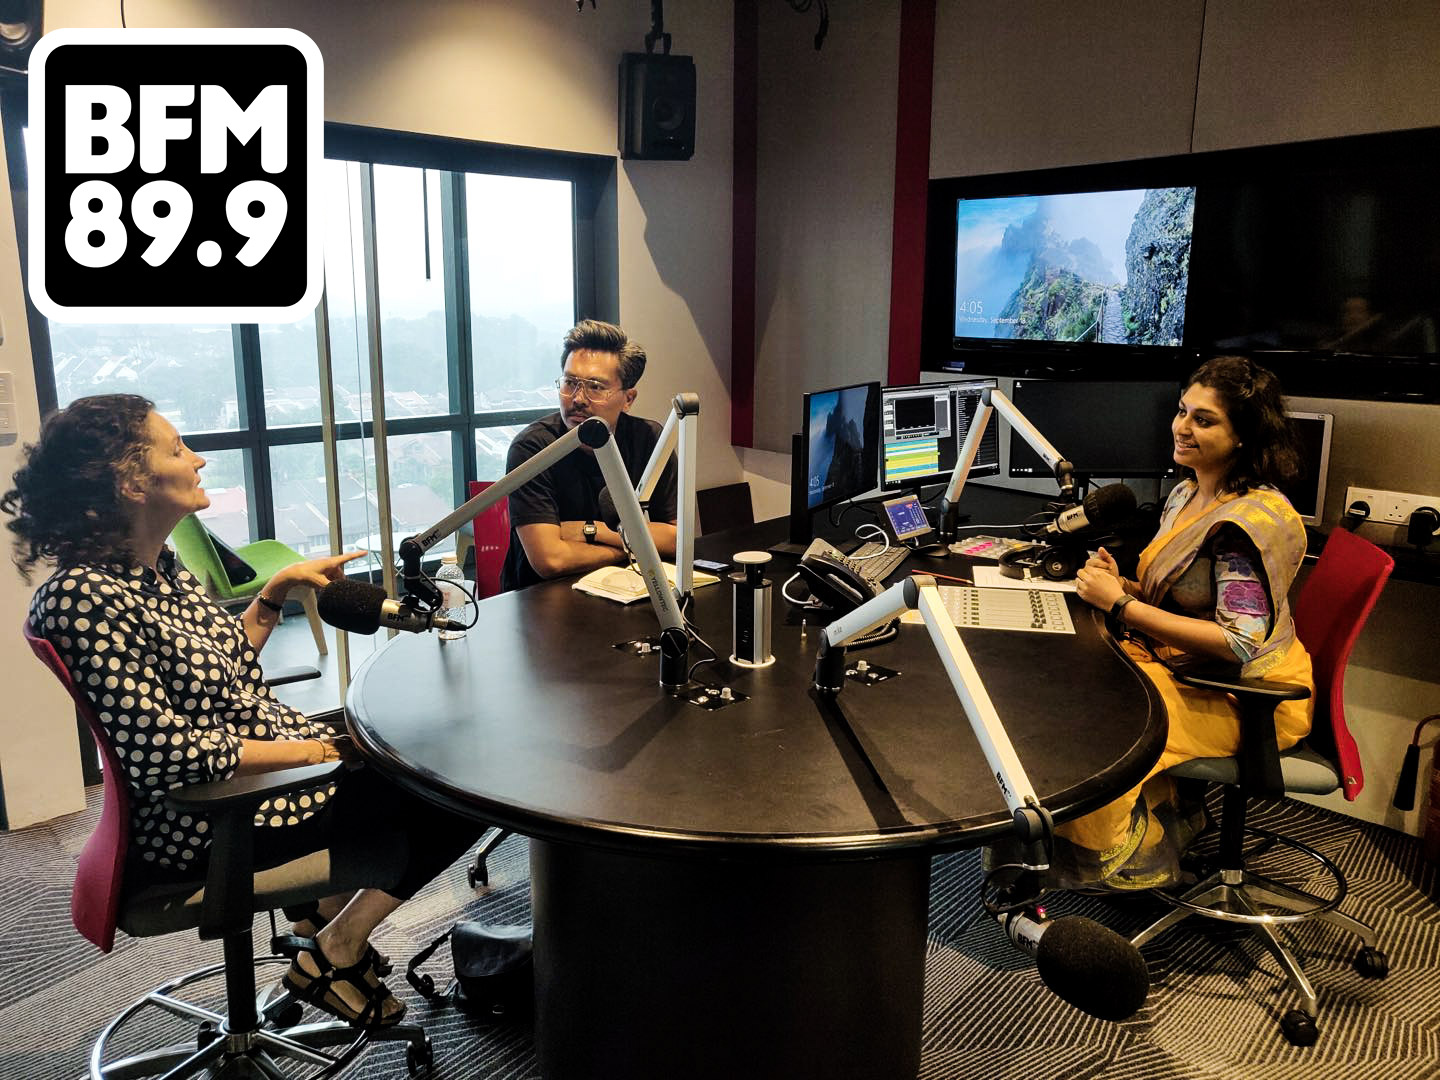 Future Proofing Cities Podcast with Caroline Bos & Ren Yee on BFM 89.9